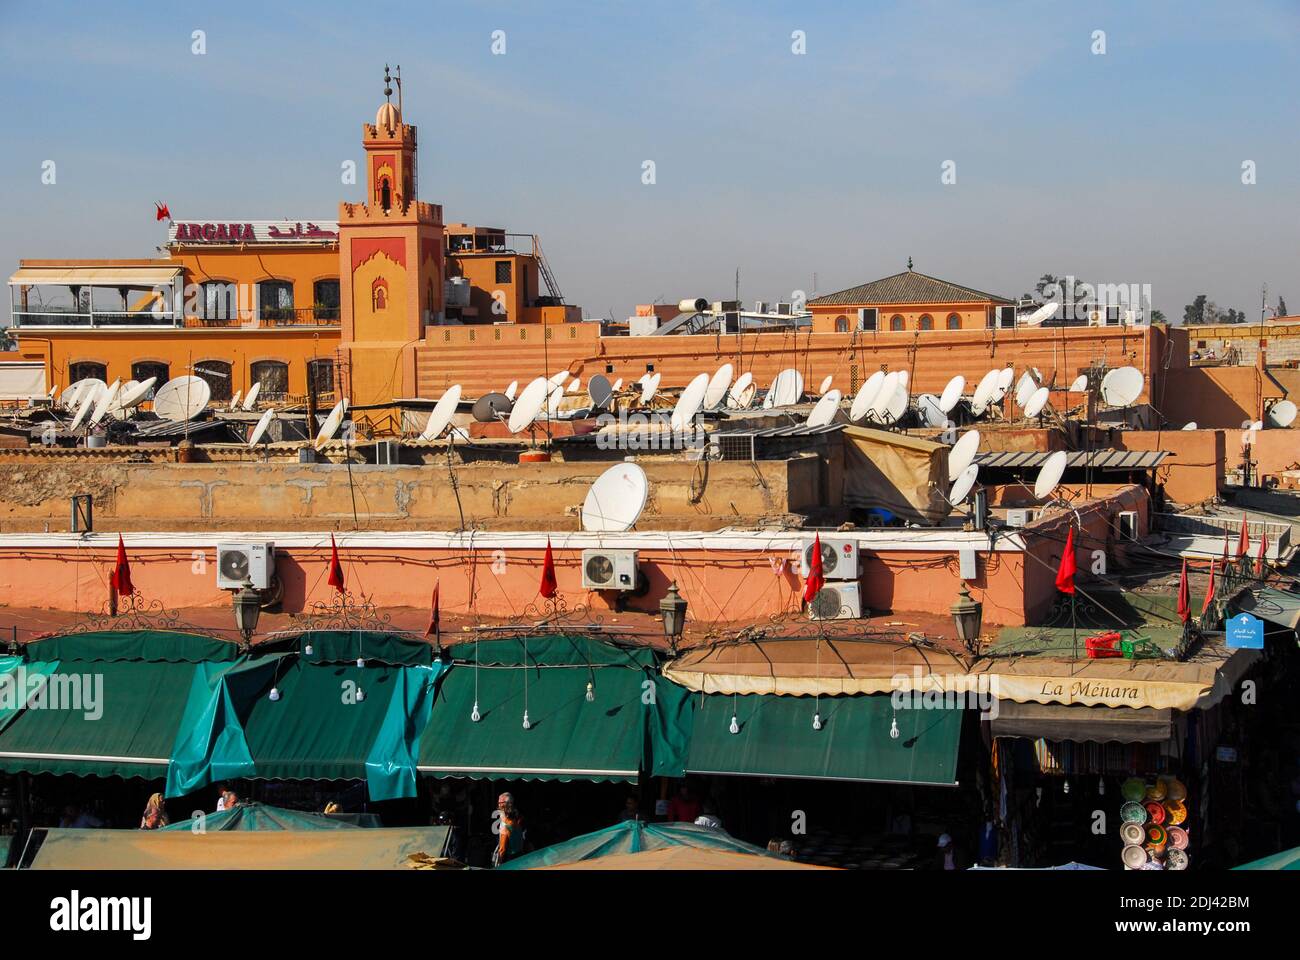 Rooftop Satellite Dishes above Jemaa el Fna Market Square, Marrakesh, Morocco Stock Photo